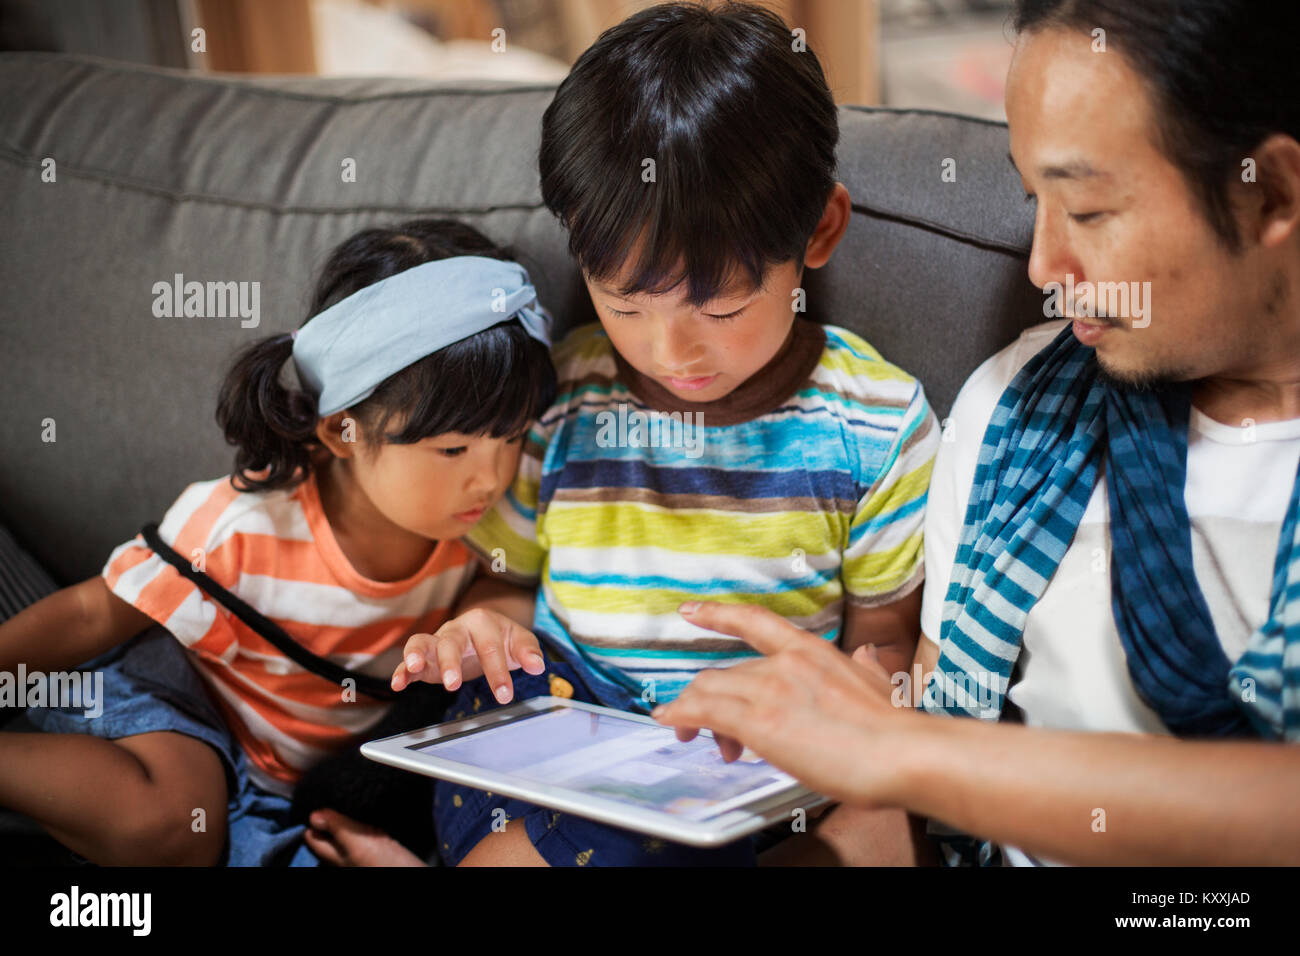 Man, boy and young girl sitting on a grey sofa, looking at digital tablet. Stock Photo